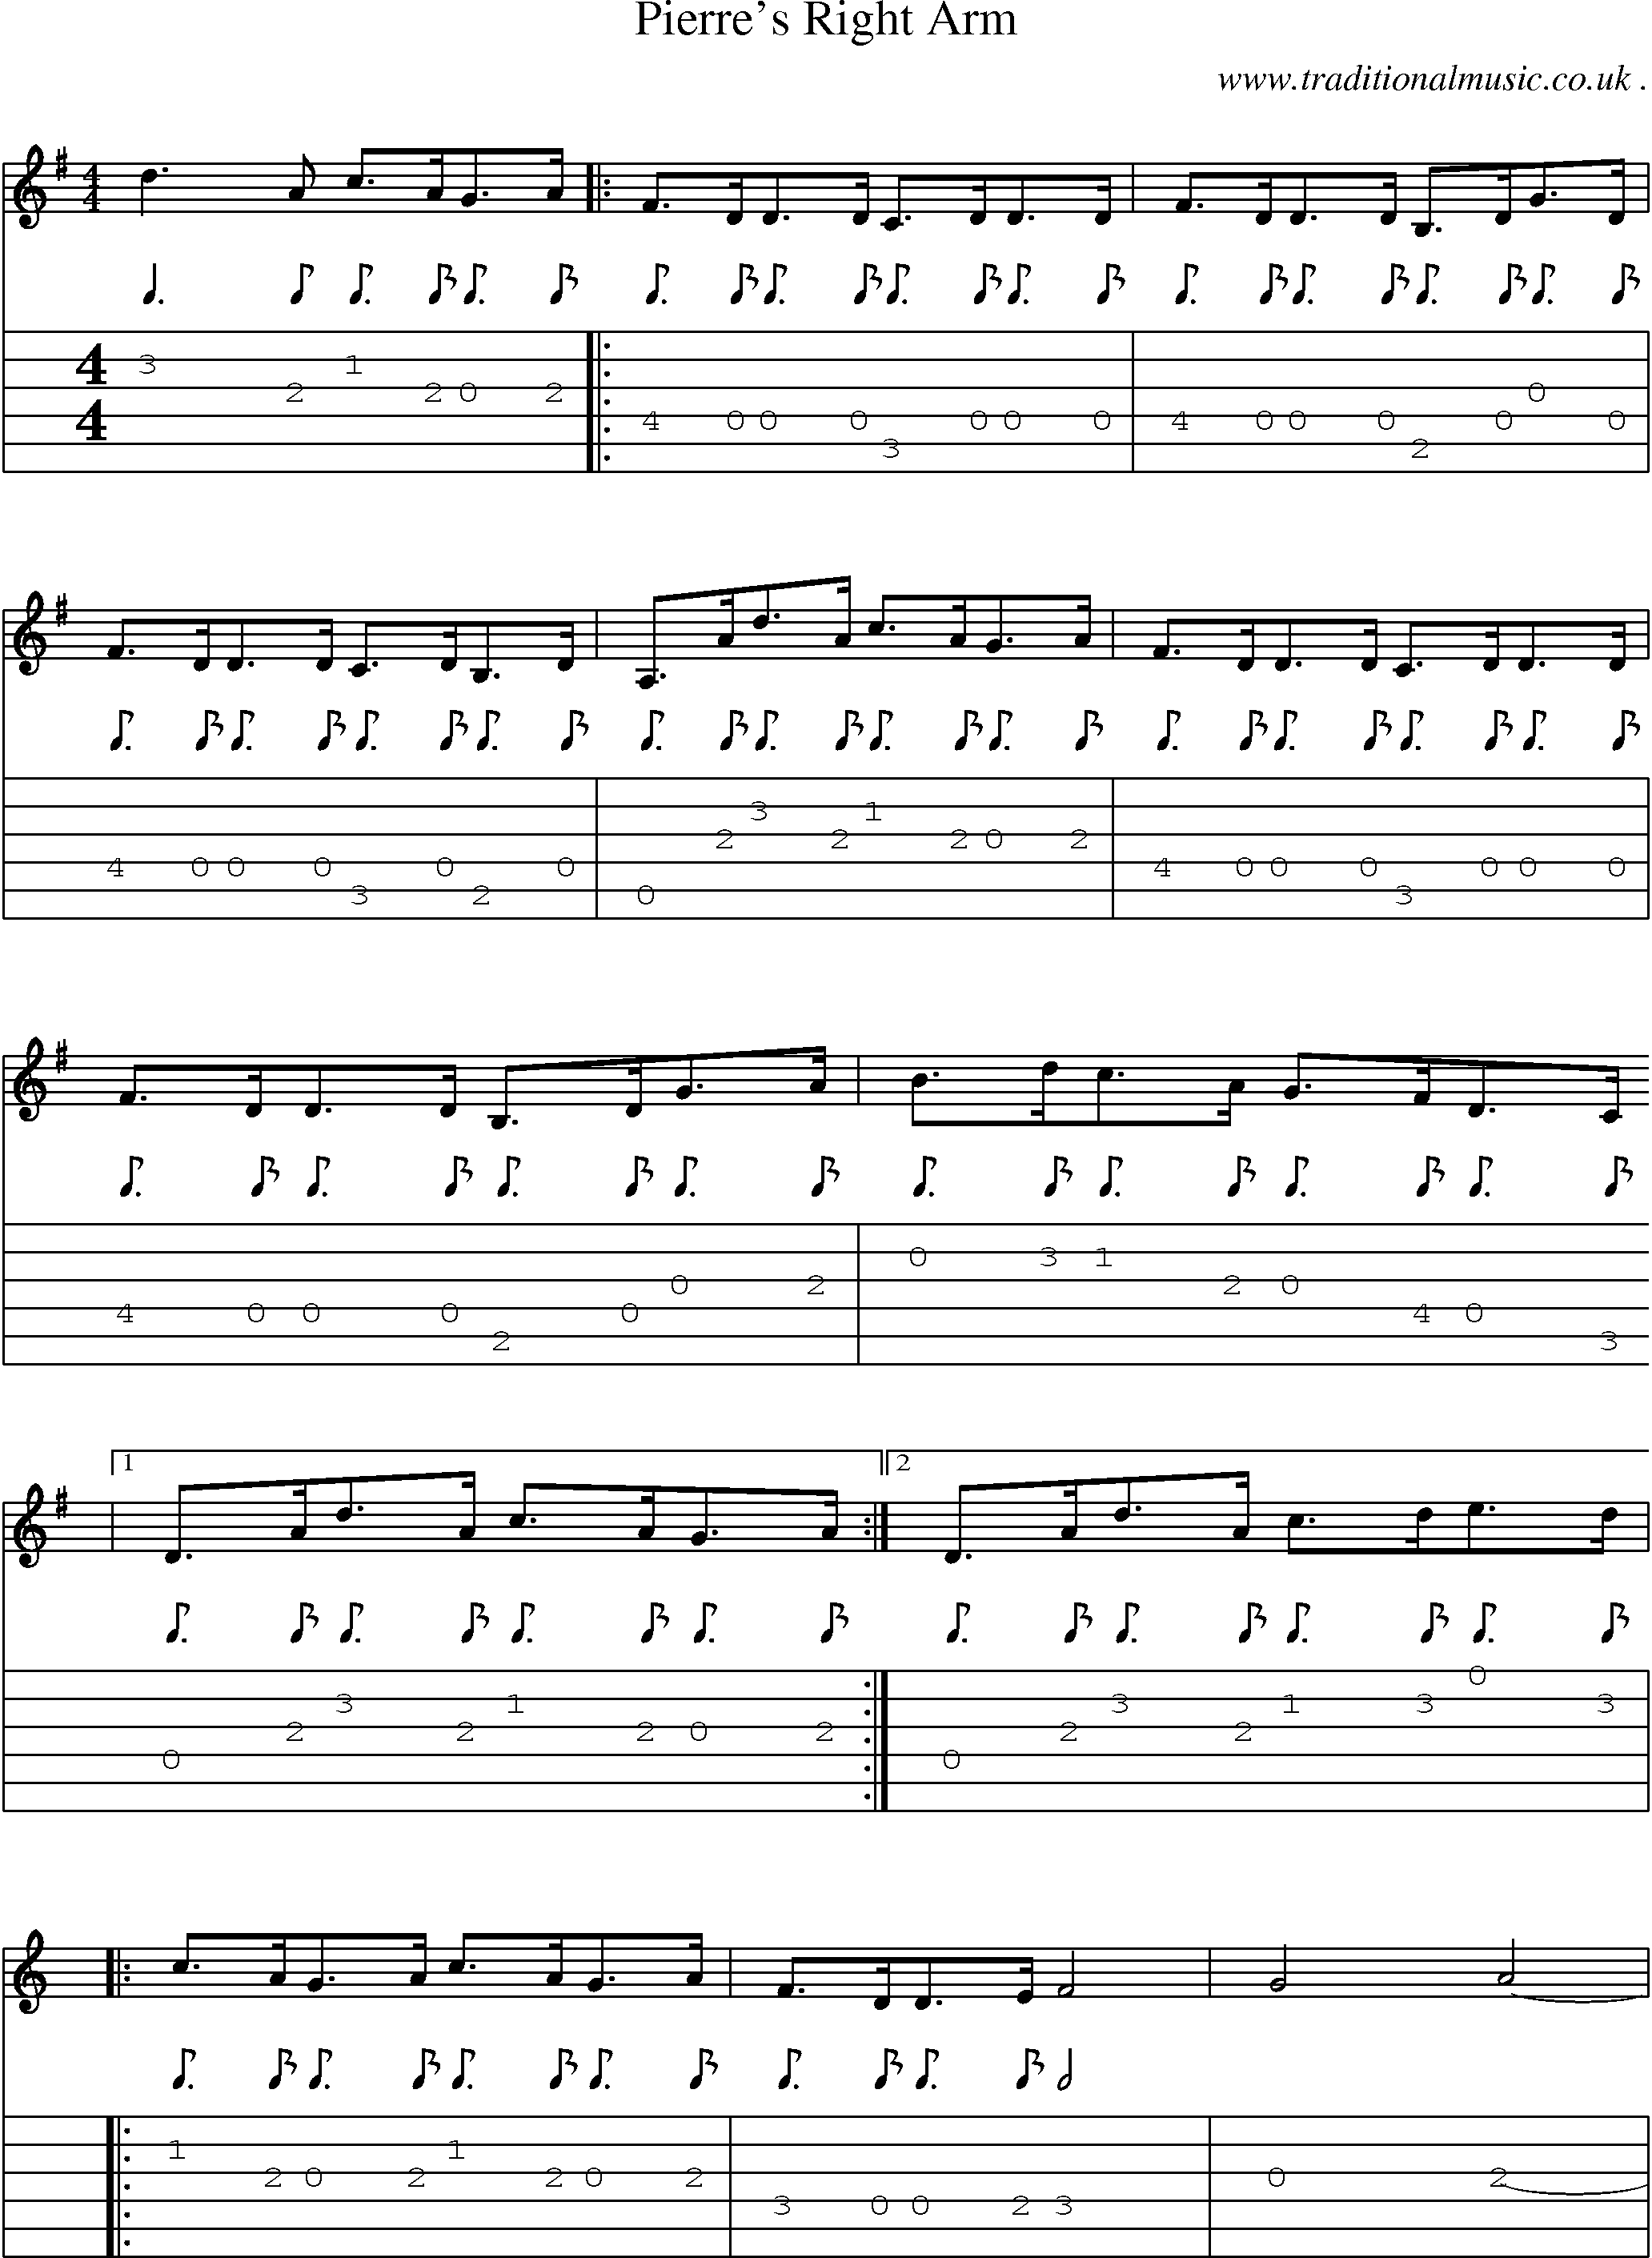 Sheet-Music and Guitar Tabs for Pierres Right Arm